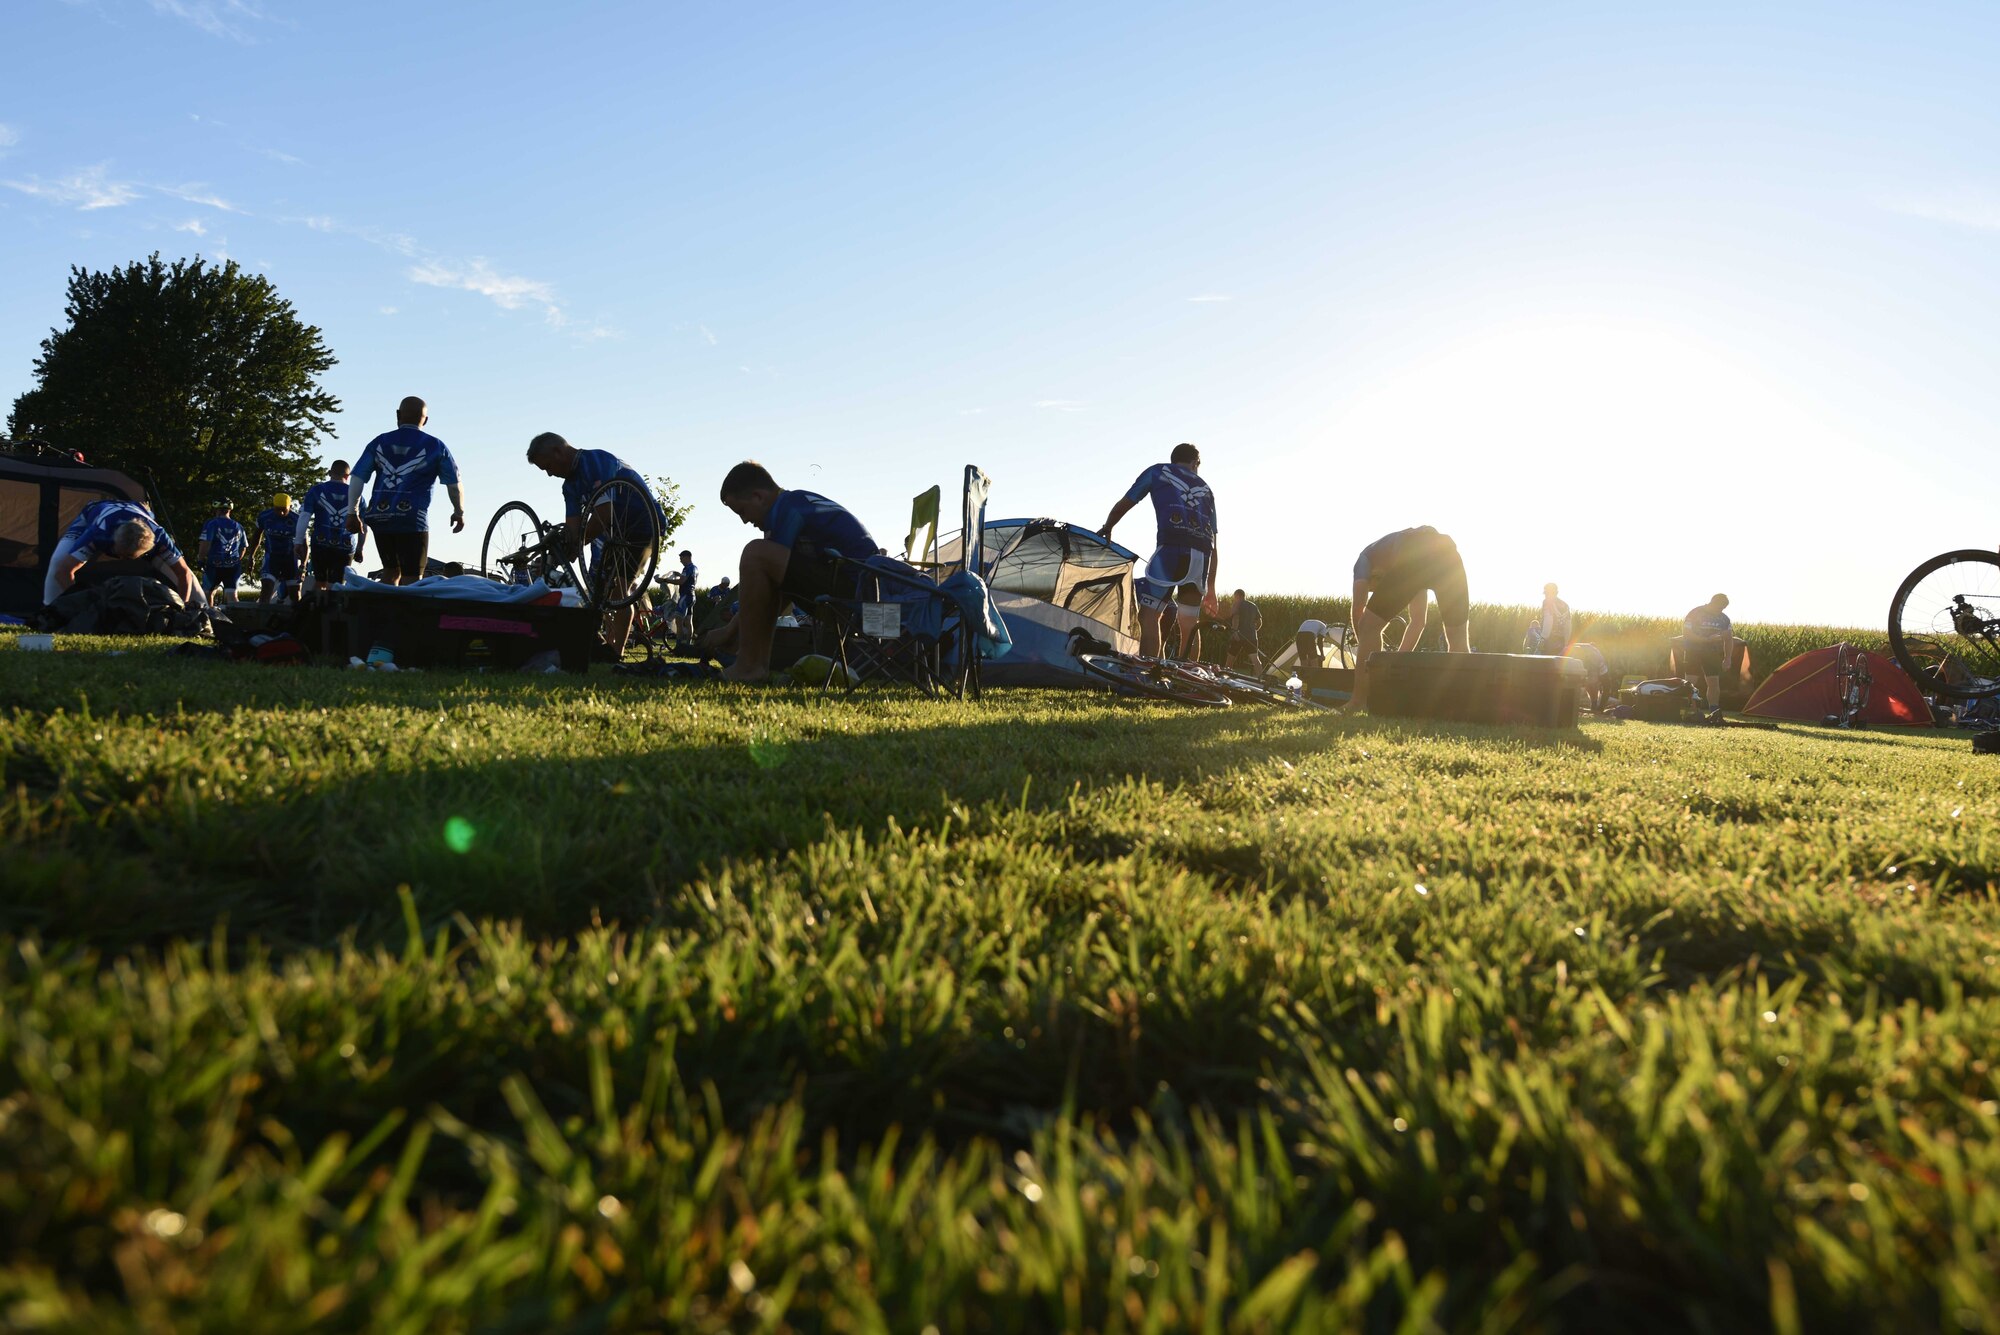 Team Dakota members help set up camp in Jefferson, Iowa, July 24, 2018. Team Dakota and the Air Force Cycling Team participated in the Register’s Annual Great Bicycle Ride Across Iowa, where they rode roughly 460 miles, helped fix other participants’ bikes, and supported Air Forces recruiting efforts. (U.S. Air Force photo by Airman 1st Class Thomas Karol)